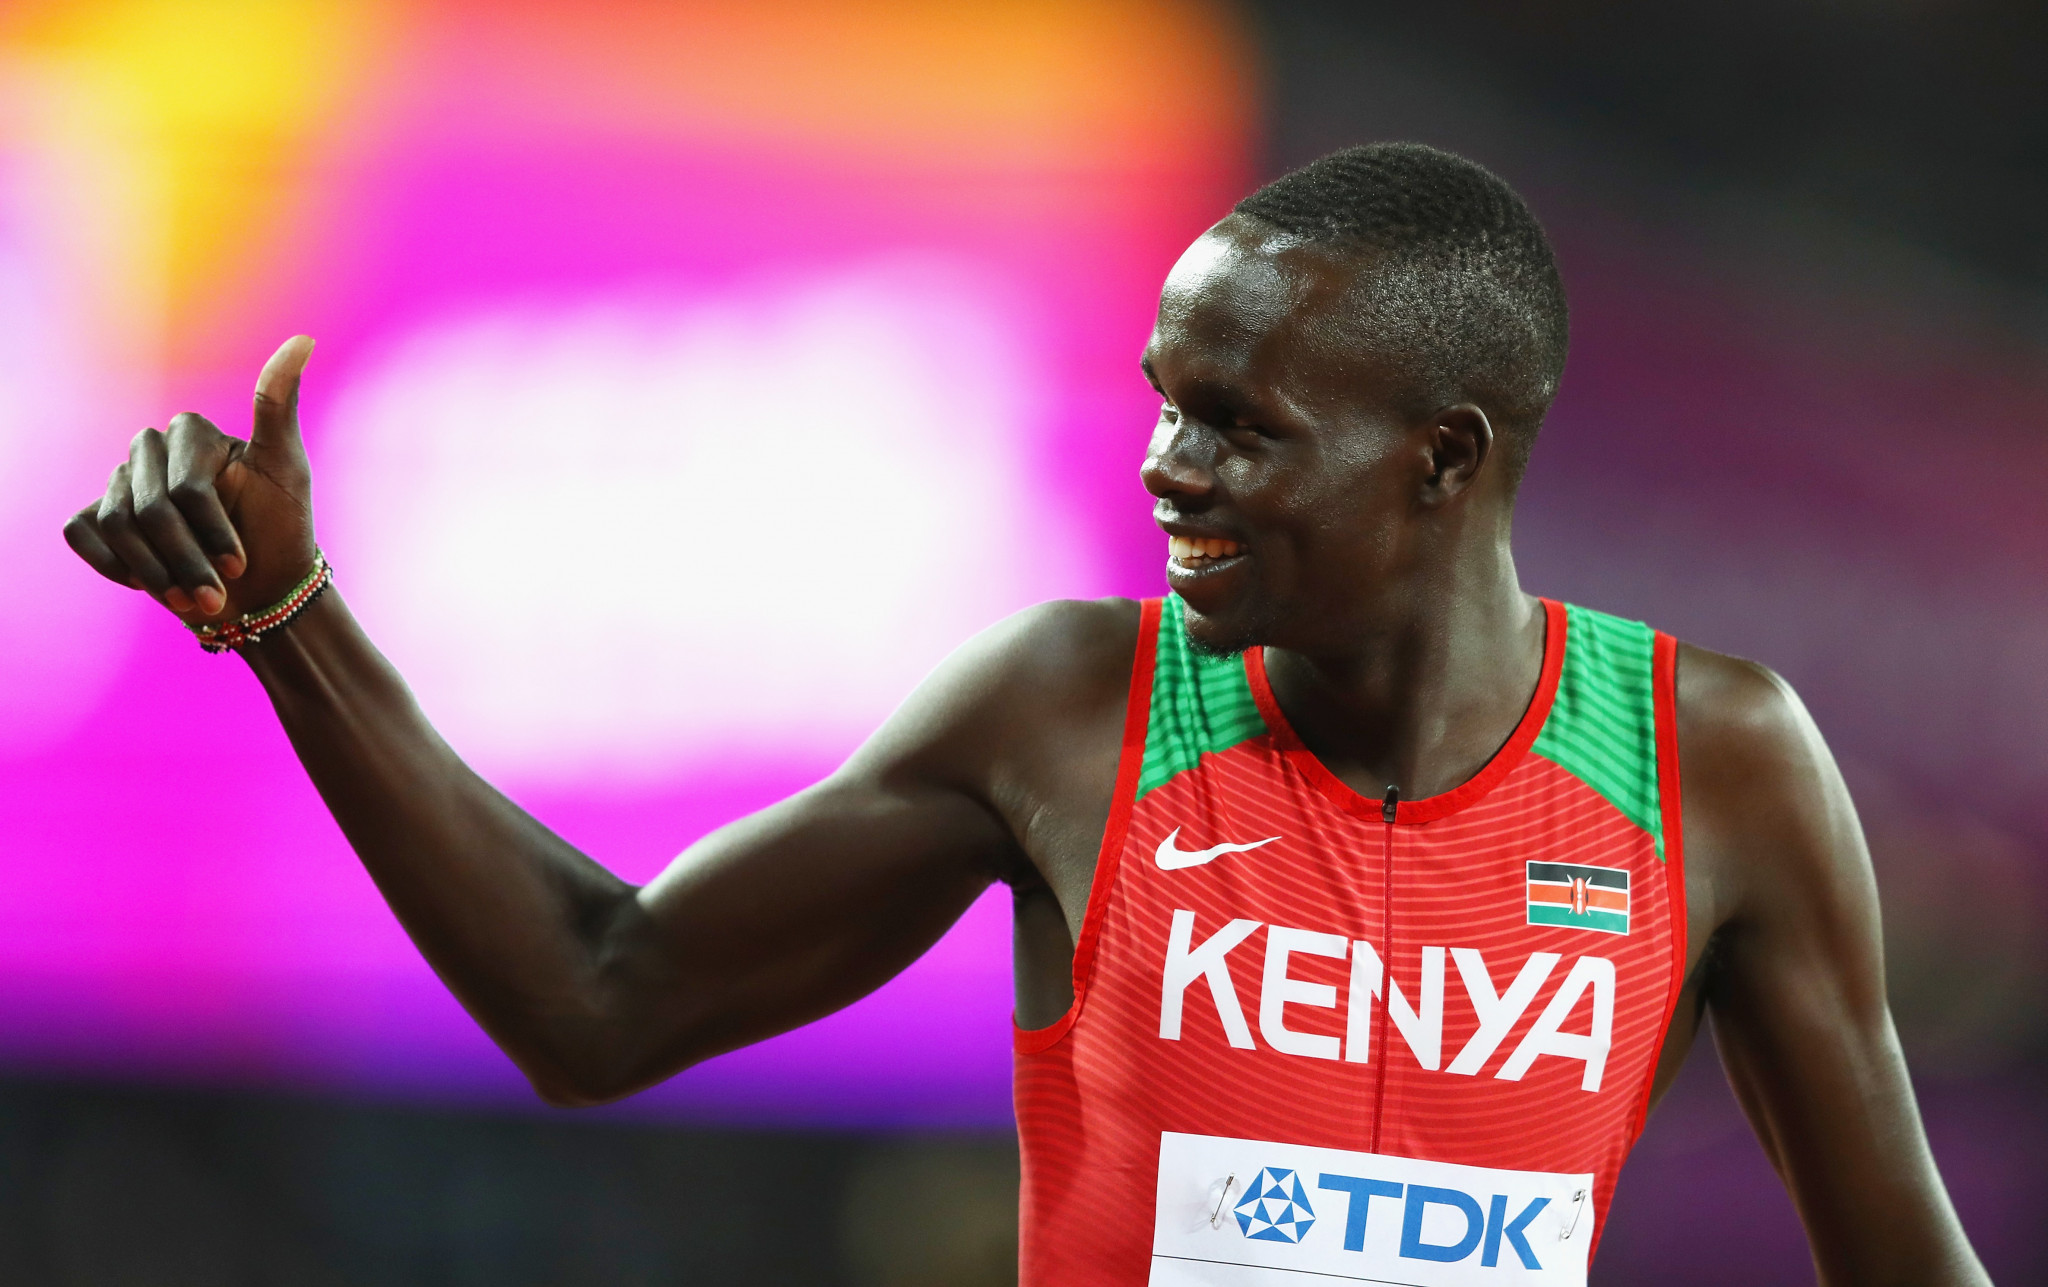 Kipyegon Bett became the latest Kenyan athlete to fail a drug test last month ©Getty Images